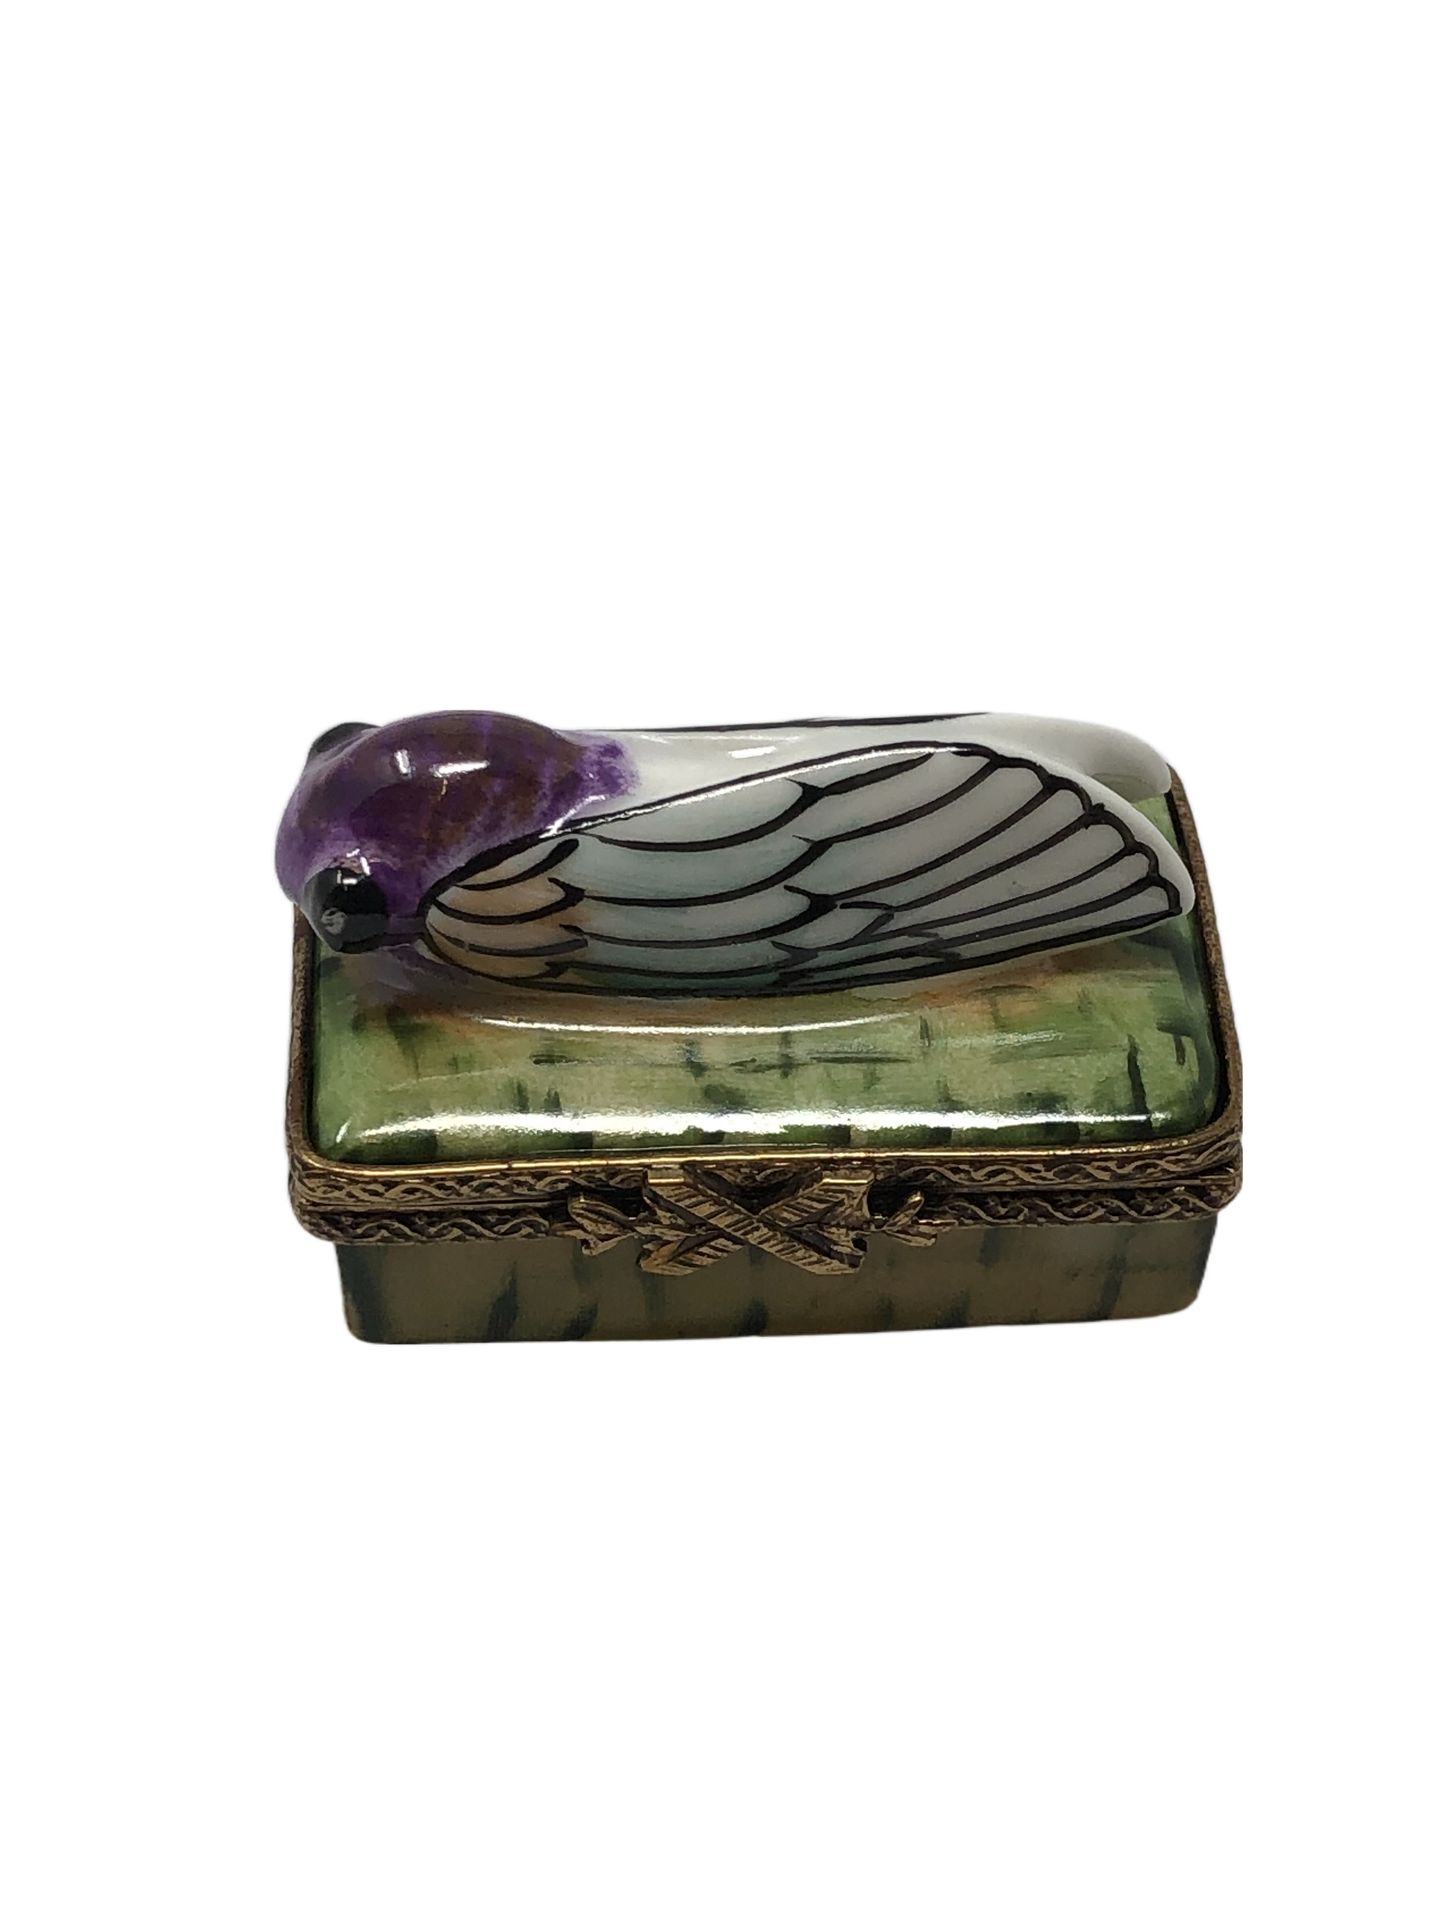 Ethereal Elegance: Resting Fly Limoges Box in Purple